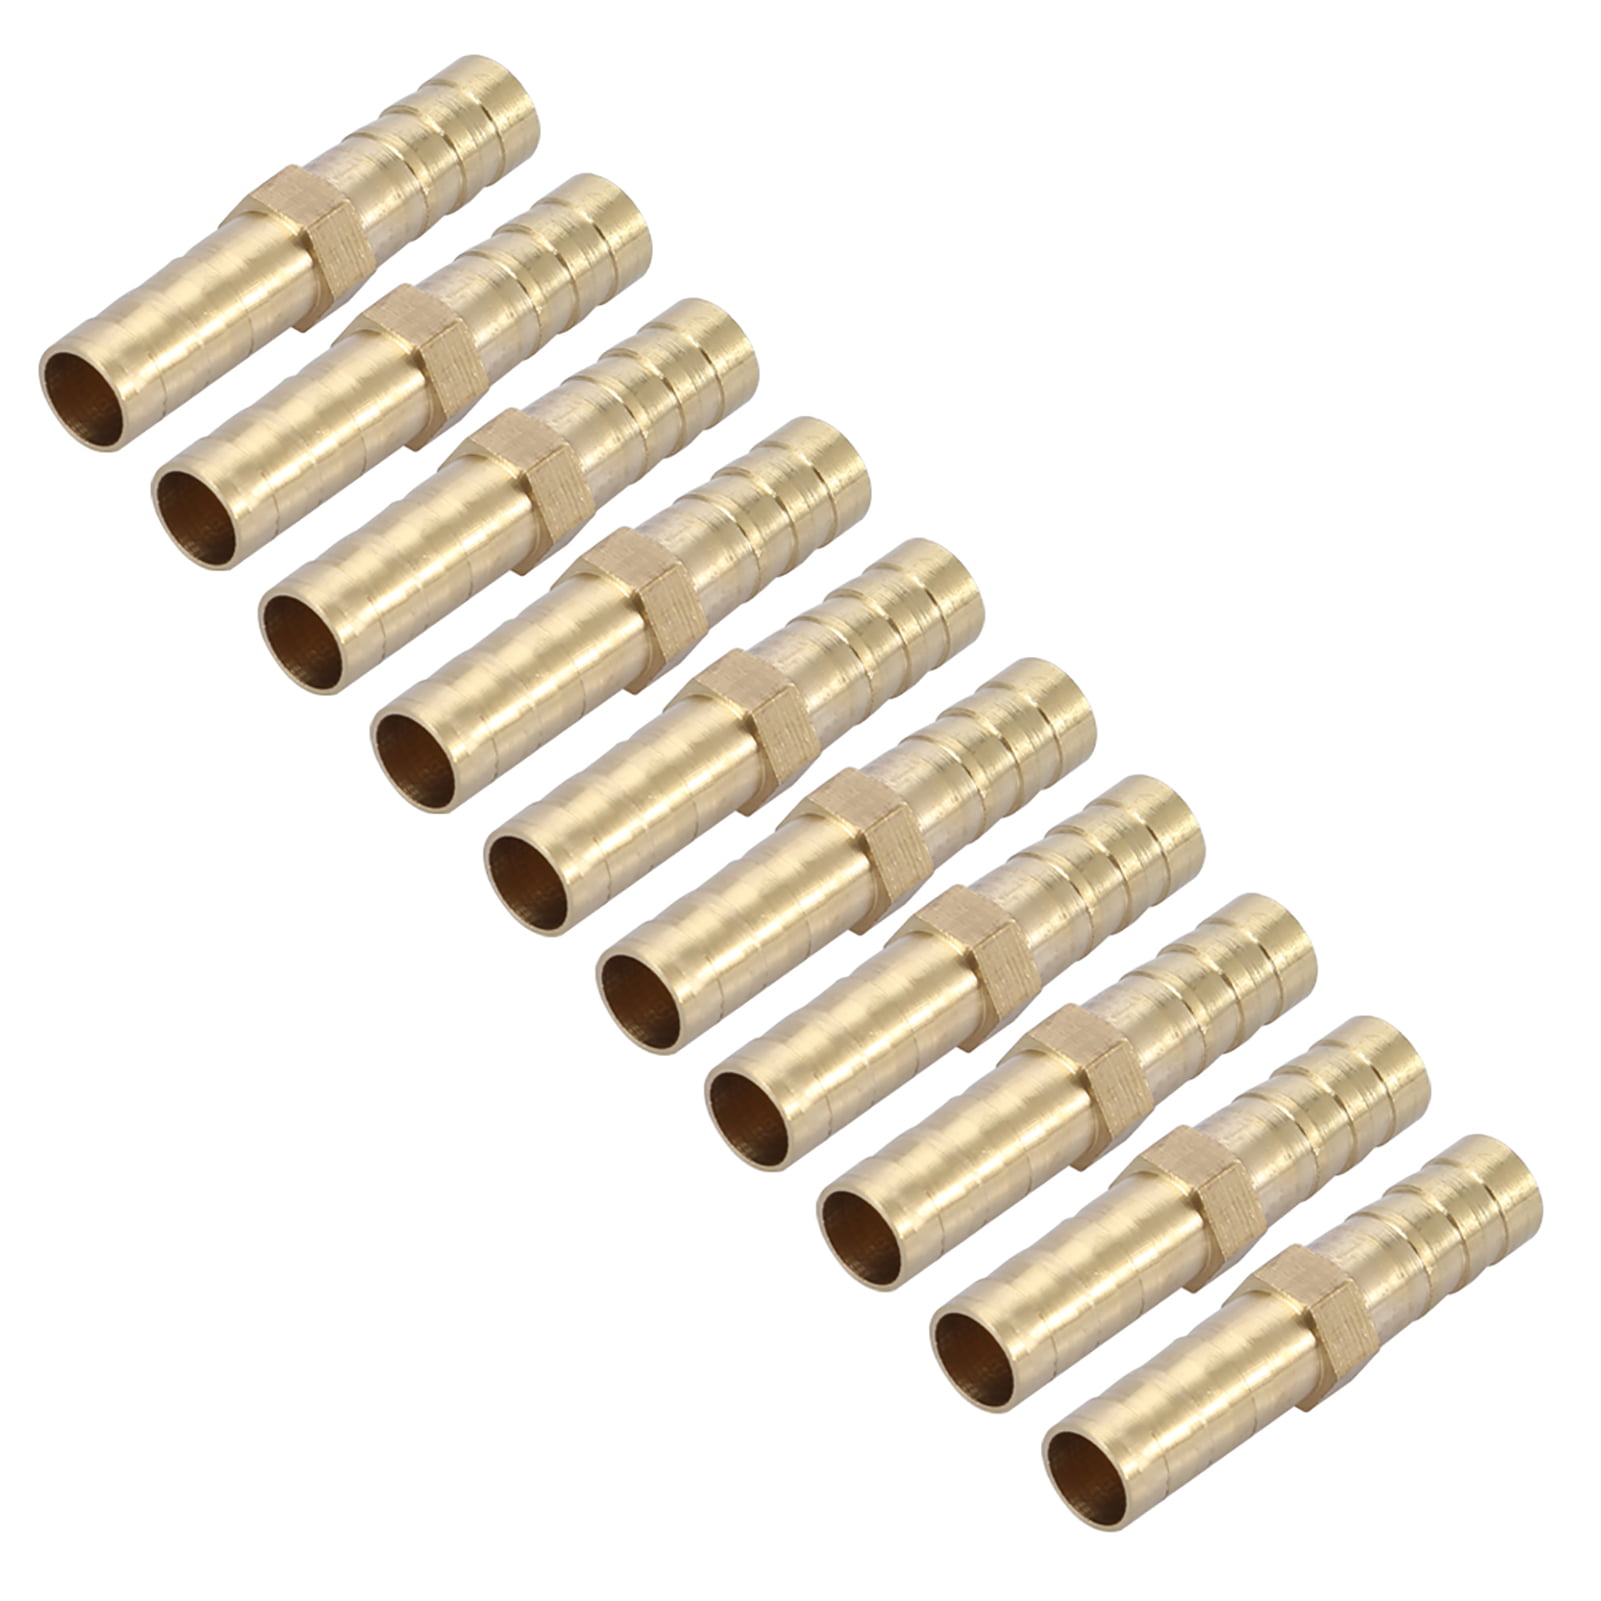 14mm 2pcs Boaby Brass Straight Barbed Connector Brass Barbed Straight 2-Way Pipe Connector Tube Joiner Fitting 6/8/10/12/14/16/20mm 